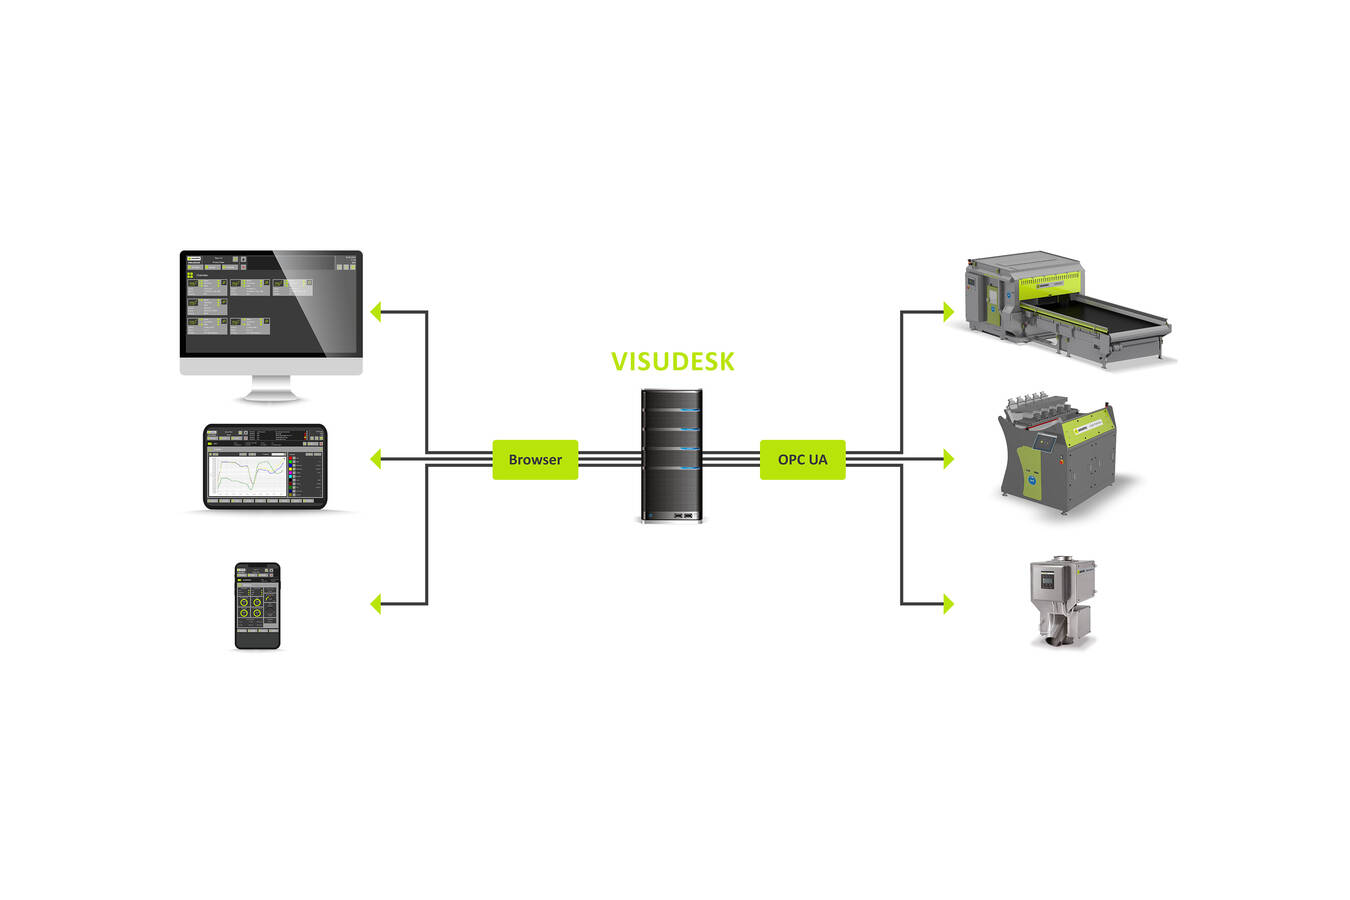 VISUDESK visualization software from Sesotec uses OPC-UA protocol. All sorting devices, even older models, can be retrofitted for compatibility. (Image: Sesotec GmbH) 